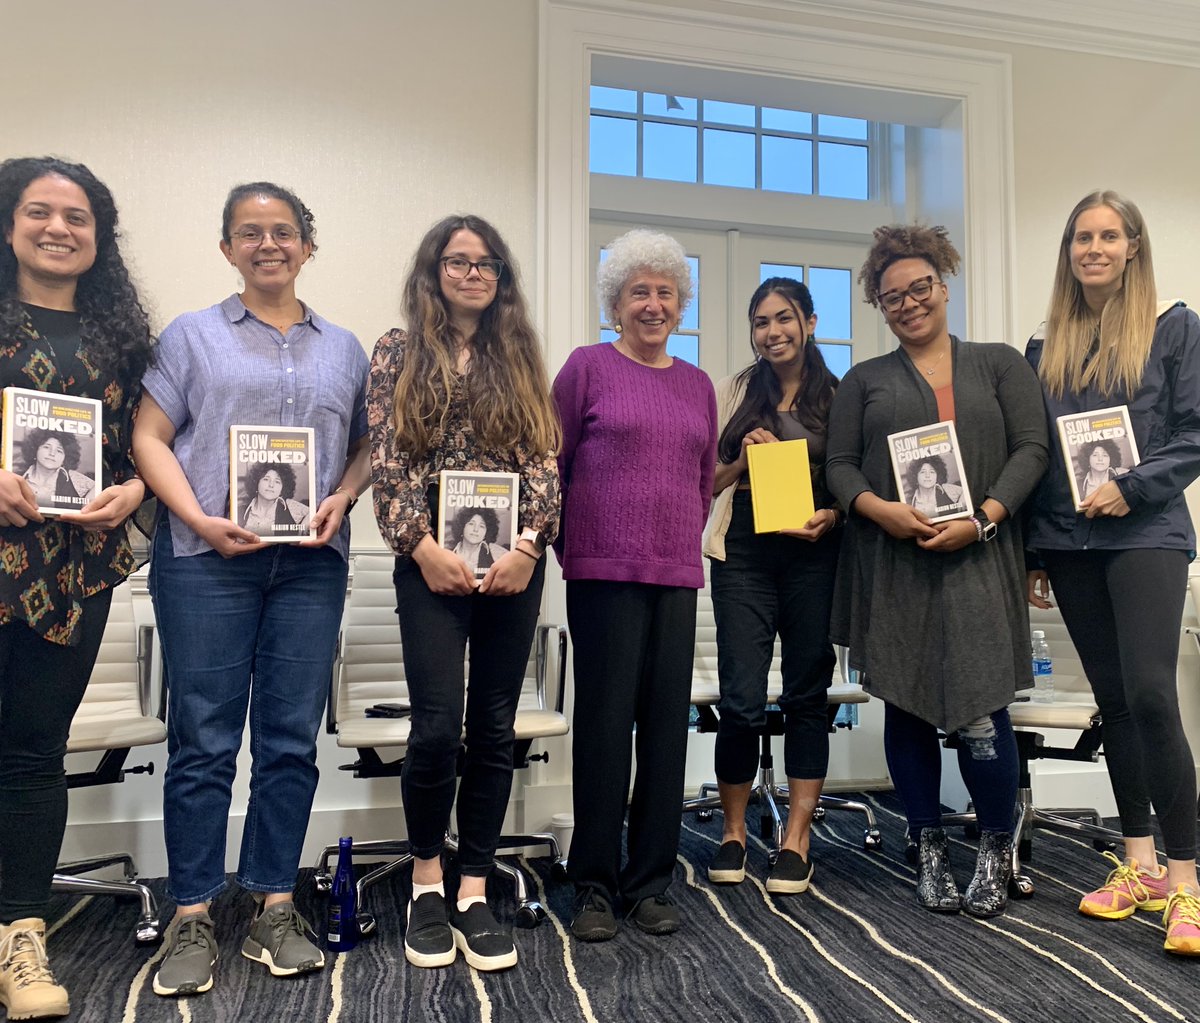 📚🍲 What a delicious journey! Our Cornell DNS book club had an amazing time reading 'Slow Cooked: An Unexpected Life in Food Politics' with the brilliant author @marionnestle. From farm to table, she serves up a thought-provoking blend of food and politics. #FoodPolitics